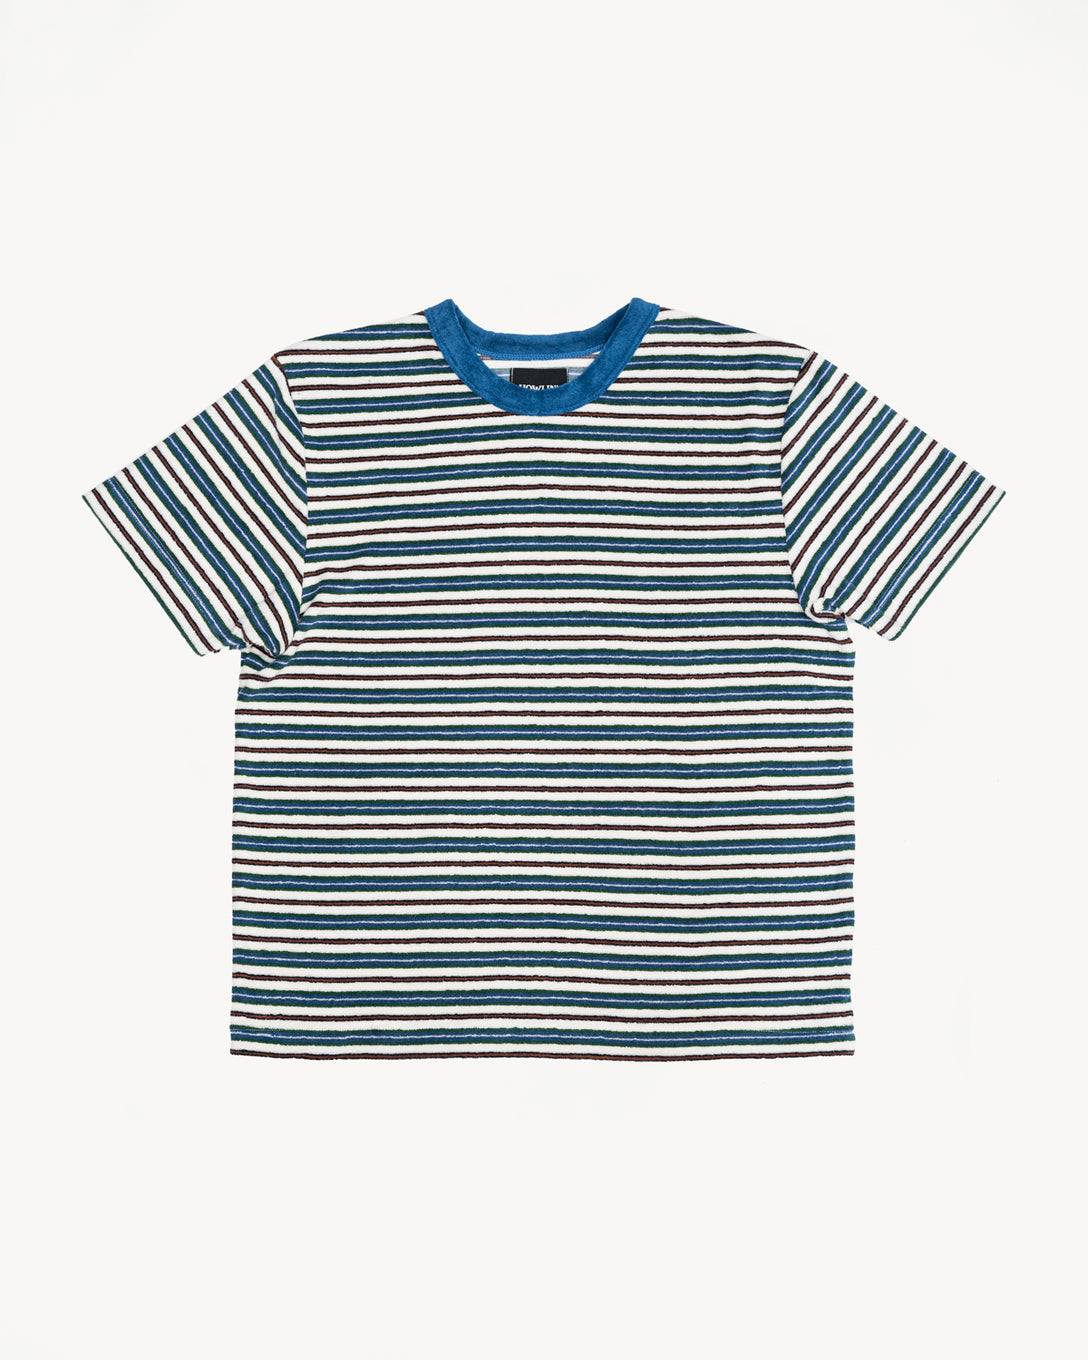 Lost in Thought Tee - Mystery Blue